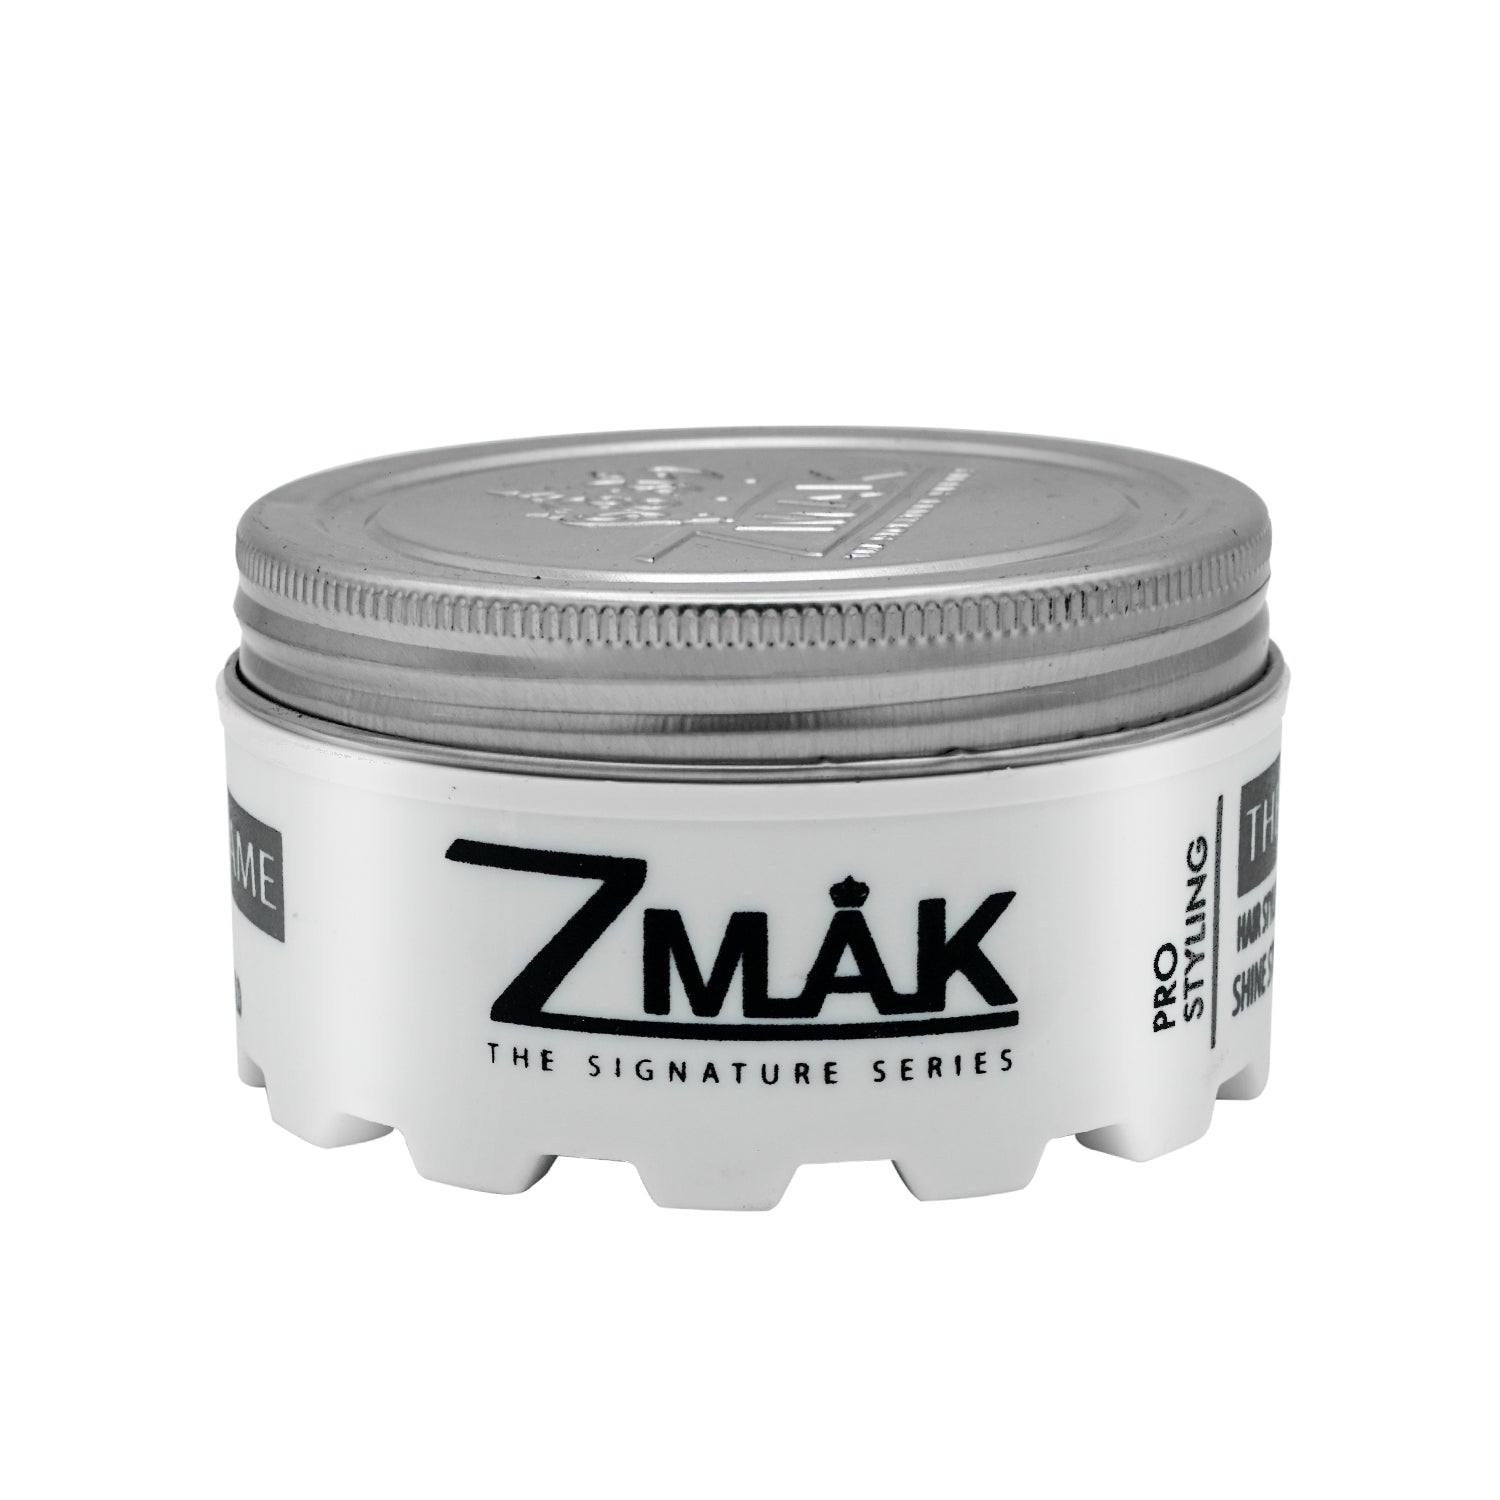 Hair Wax for Men and Women - Strong Hold - Firm Shine - Easy To Wash Out - for all Hair Types - Add Volume and Texture (150 ML) - 3 Pack of The Flame - ZMAK The Signature Series